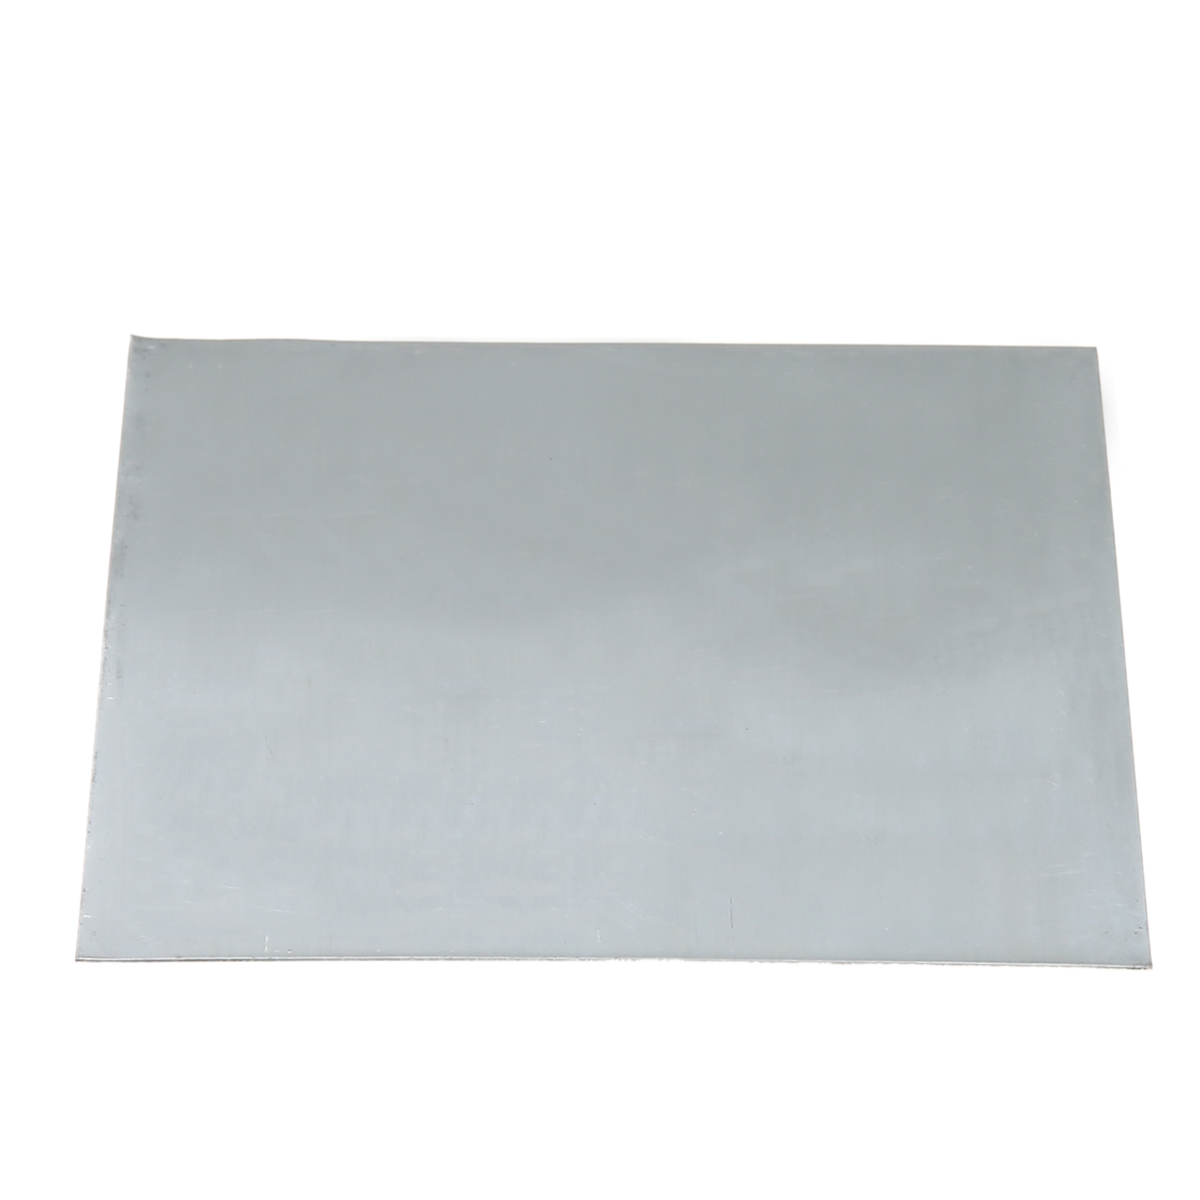 New 99.9% Pure Zinc Plate Mayitr Zinc Zn Sheet Plate 100mmx100mmx0.2mm For Science Lab Accessories